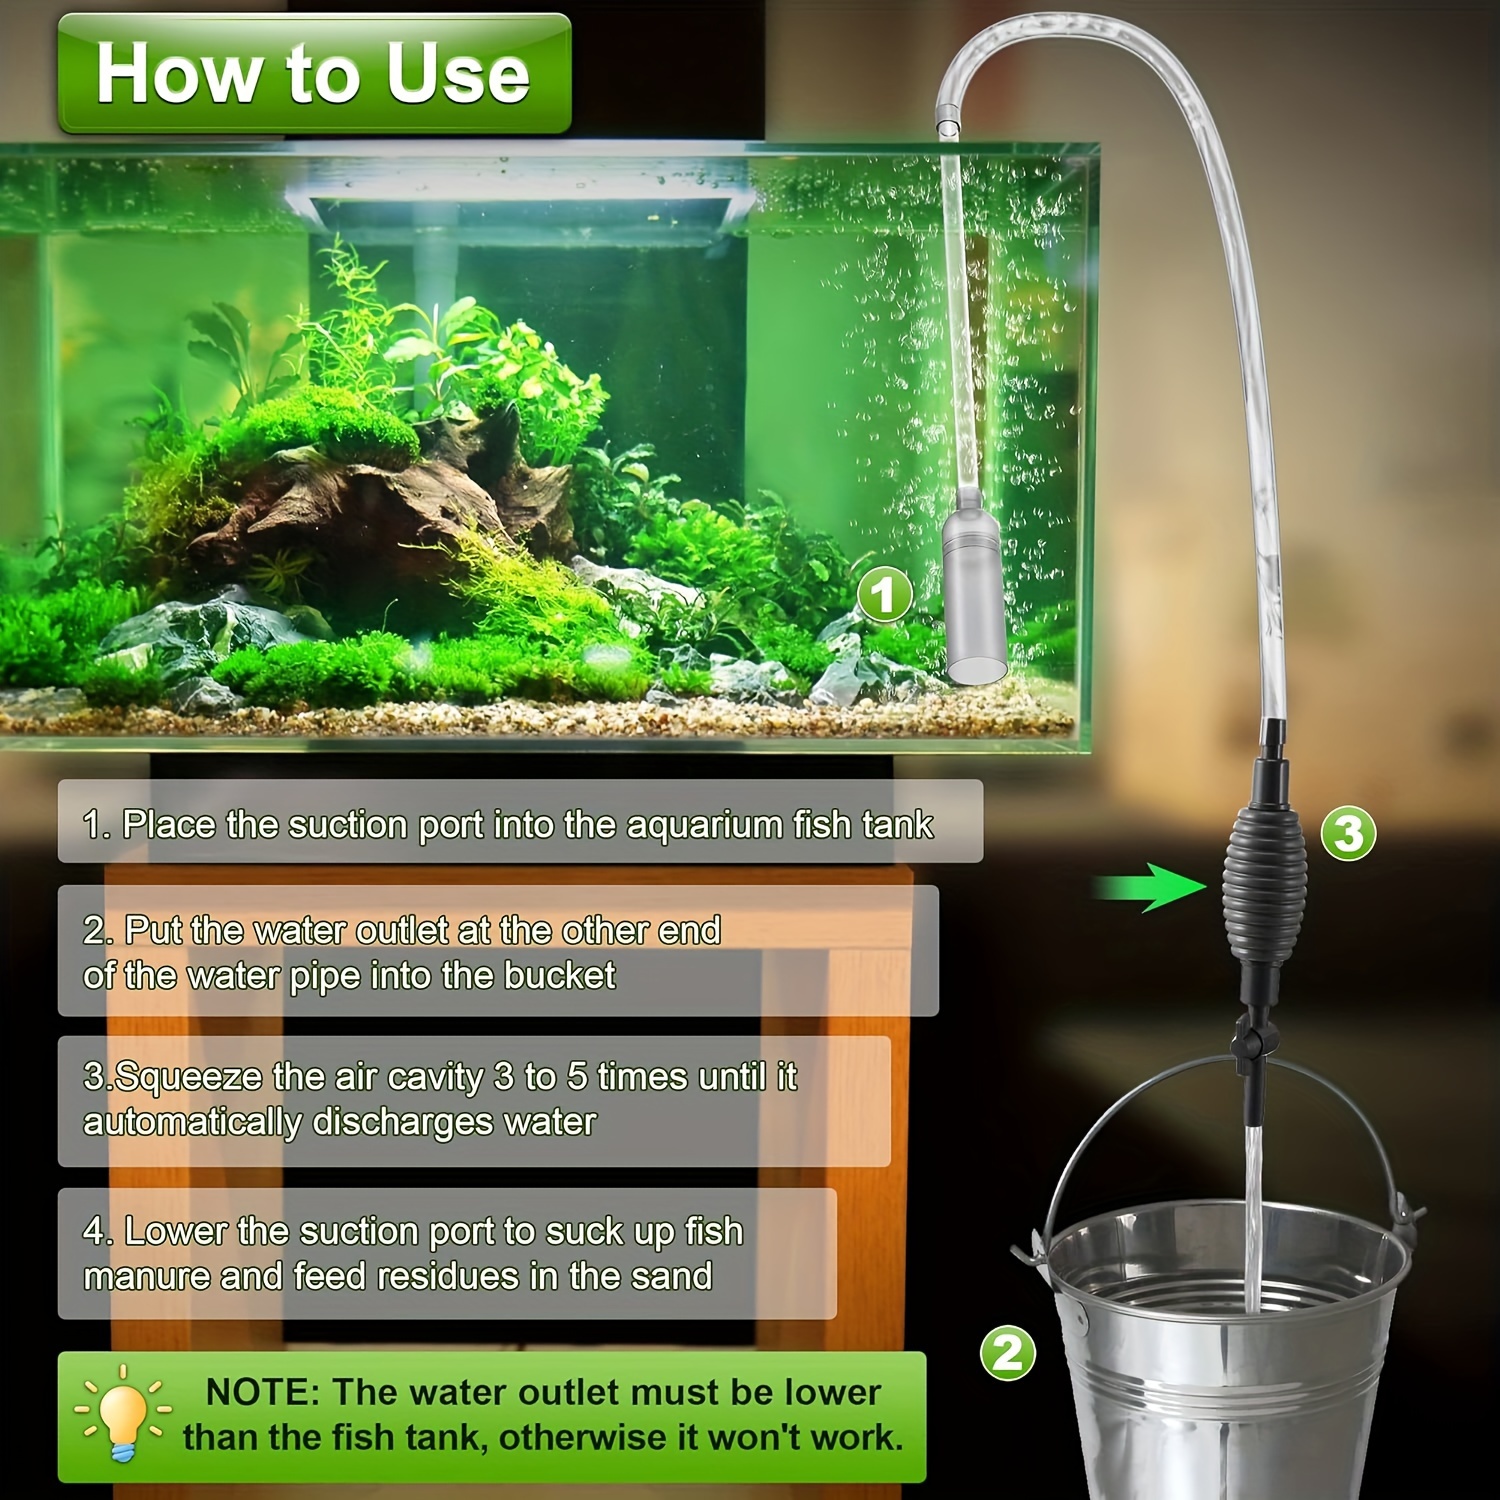 JOR Turtle Tank Siphon, Manual Hand Pump for Aquarium Water Change, Quick  to Assemble & Easy to Use, Includes Flexible Standard Tubing, Netted